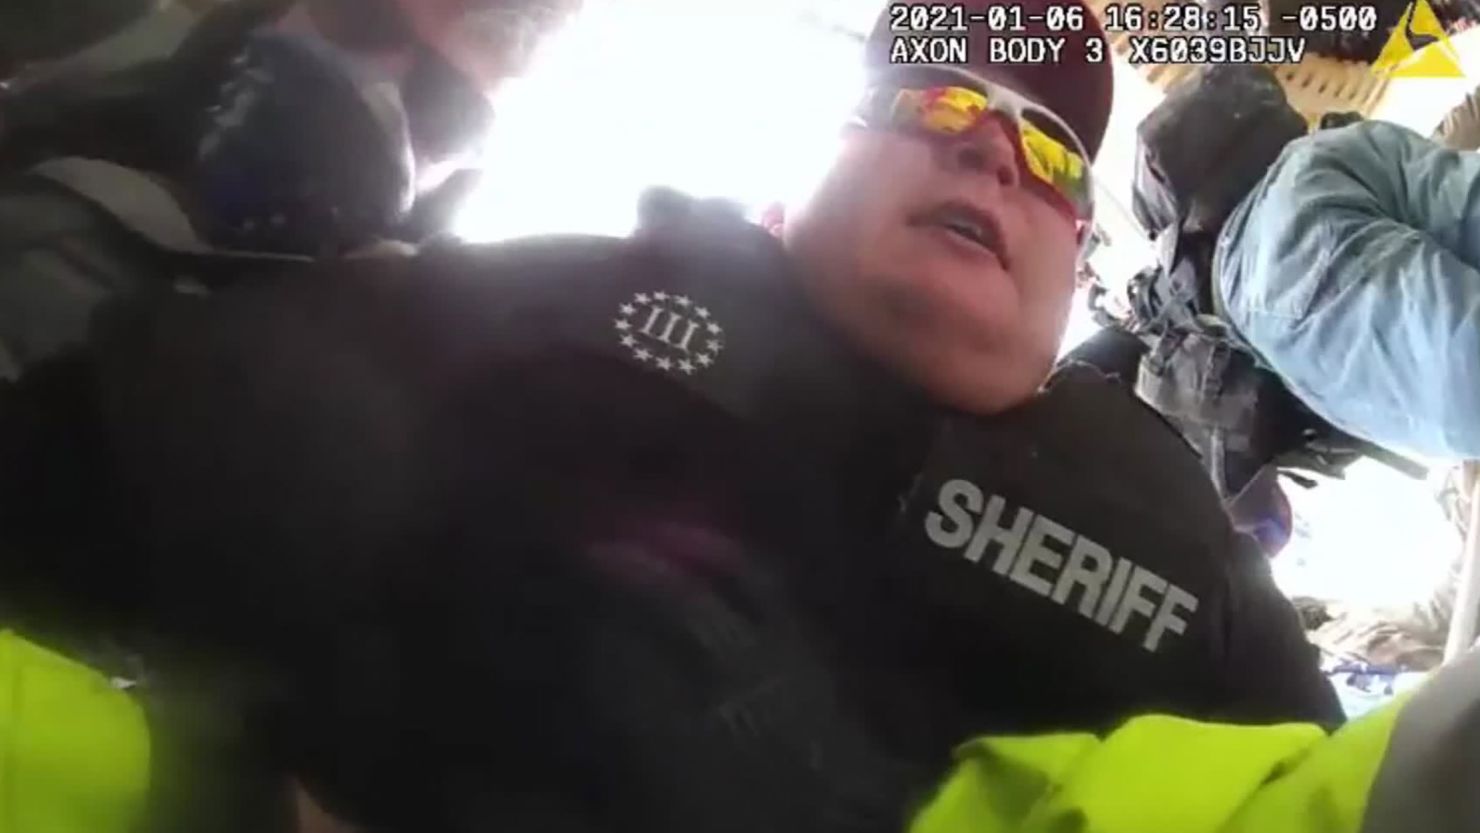 The Justice Department says this image, taken from police bodycam footage, shows then-Deputy Sheriff Ronald McAbee dragging a police officer into the violent crowd outside the US Capitol on January 6.